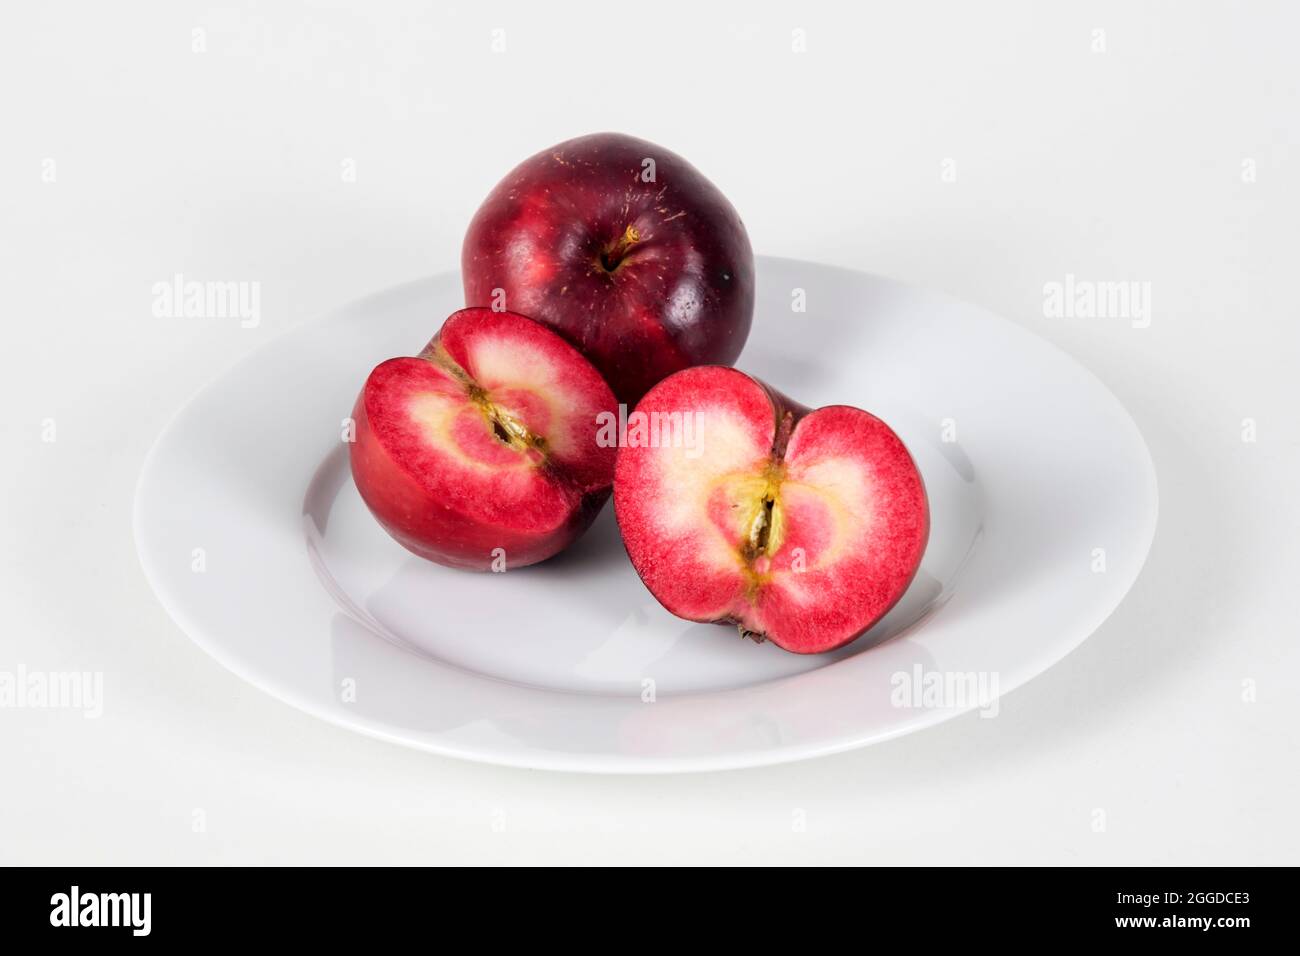 Red fleshed apples on a plate, one sliced to show colour of red flesh inside. Stock Photo